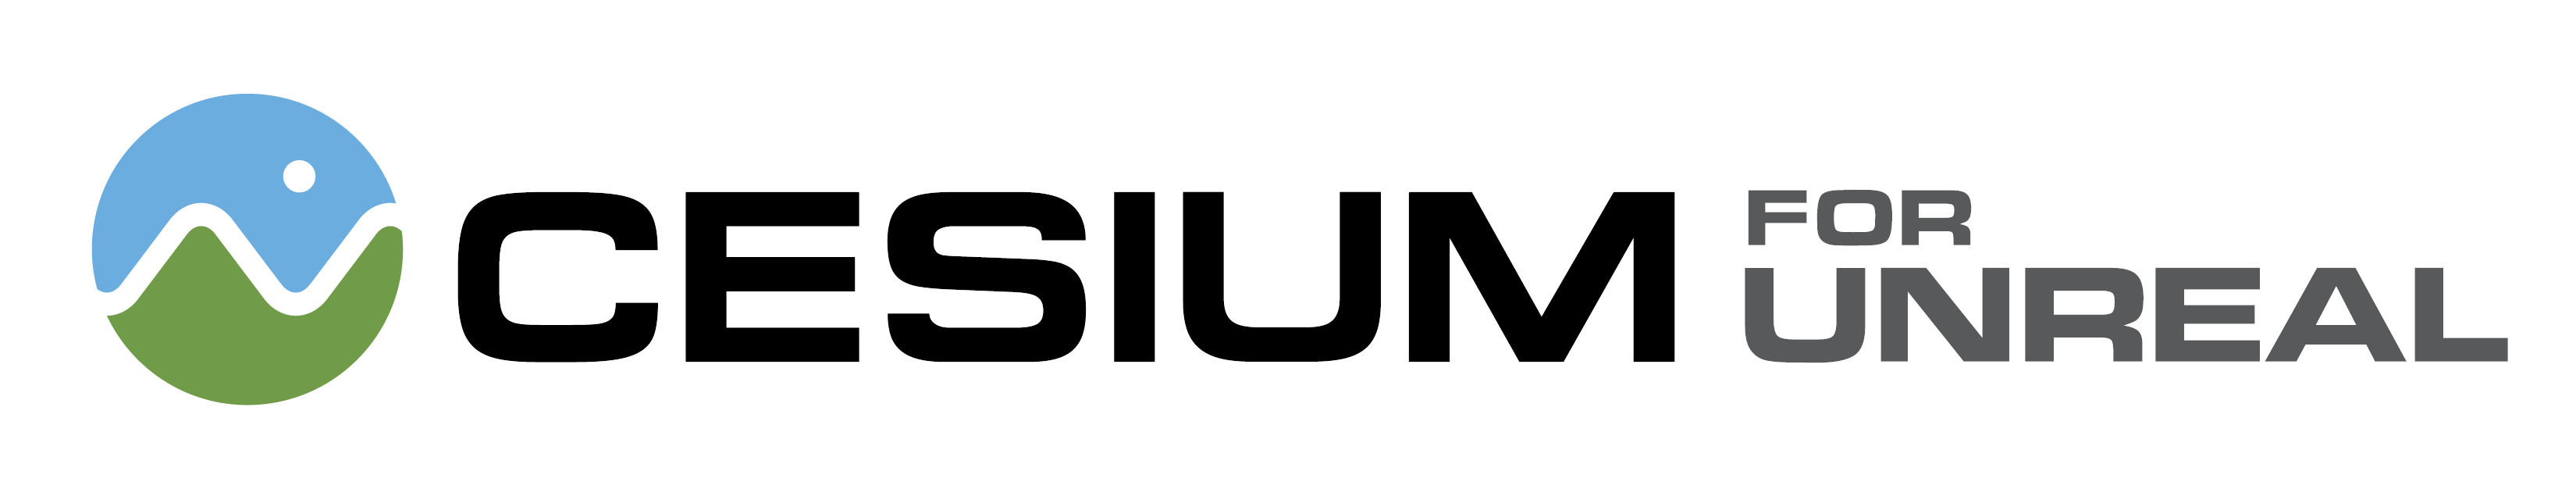 Cesium for Unreal Logo